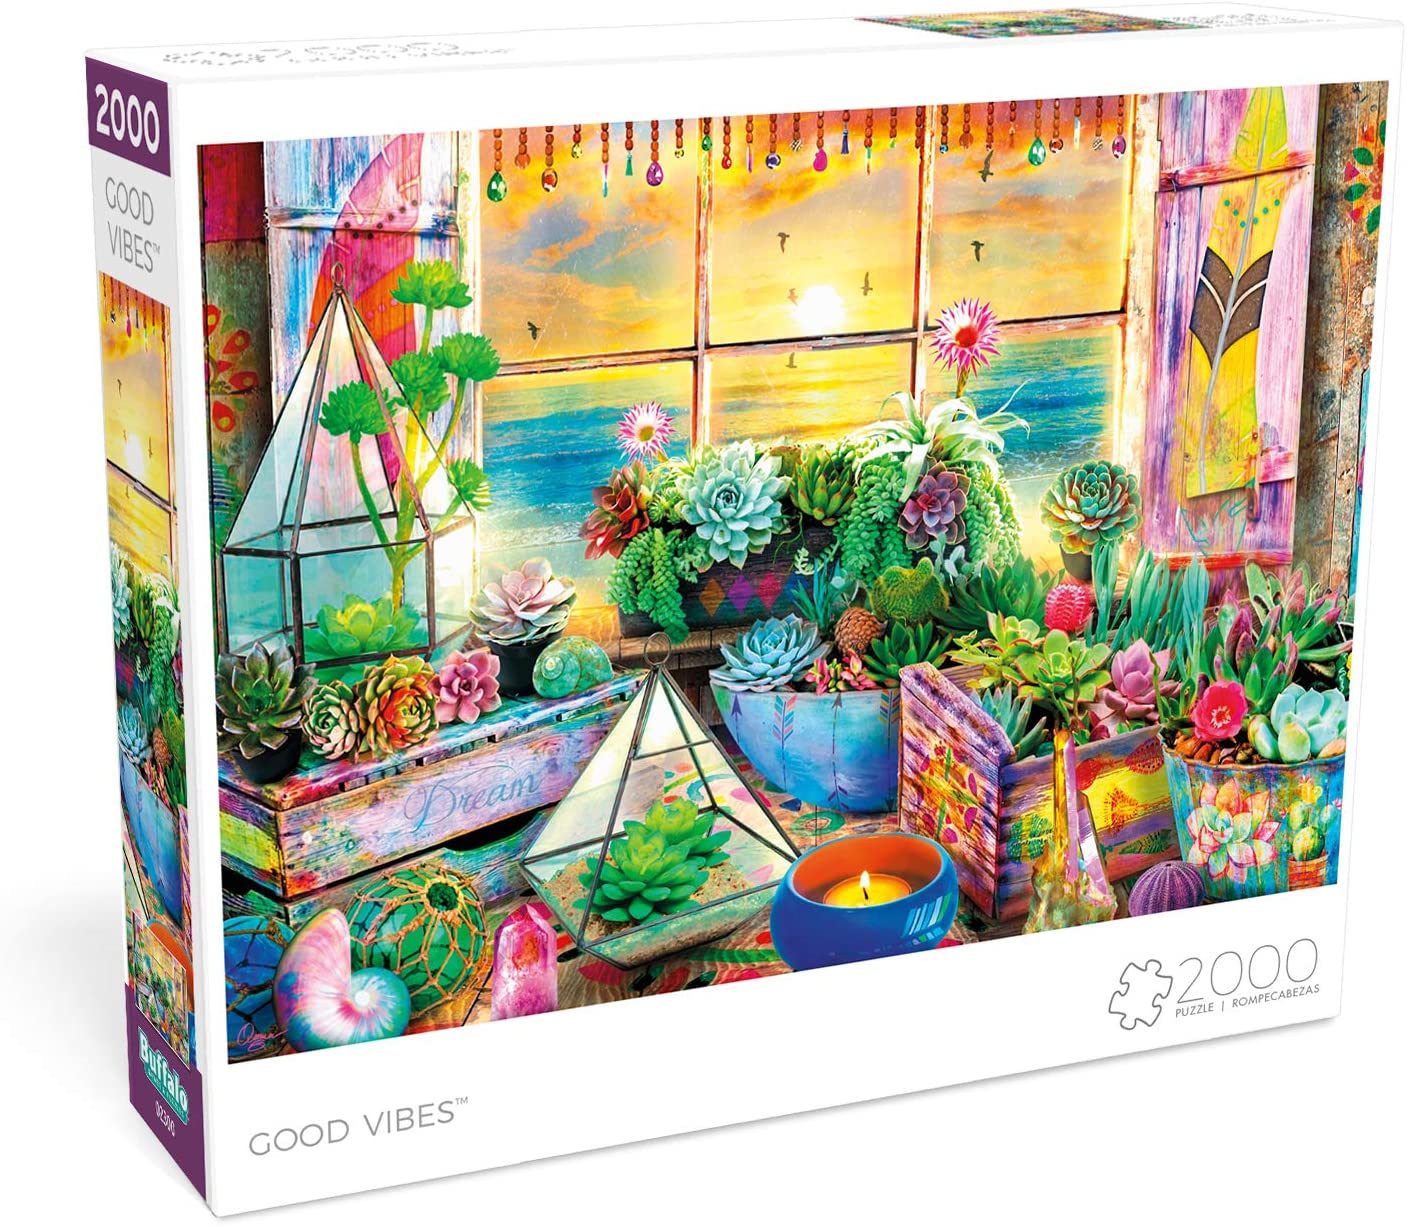 2000 Piece Jigsaw Puzzle - Buffalo Games - Aimee Stewart - Good Vibes​ - $4.48 @ Amazon + FS with Prime